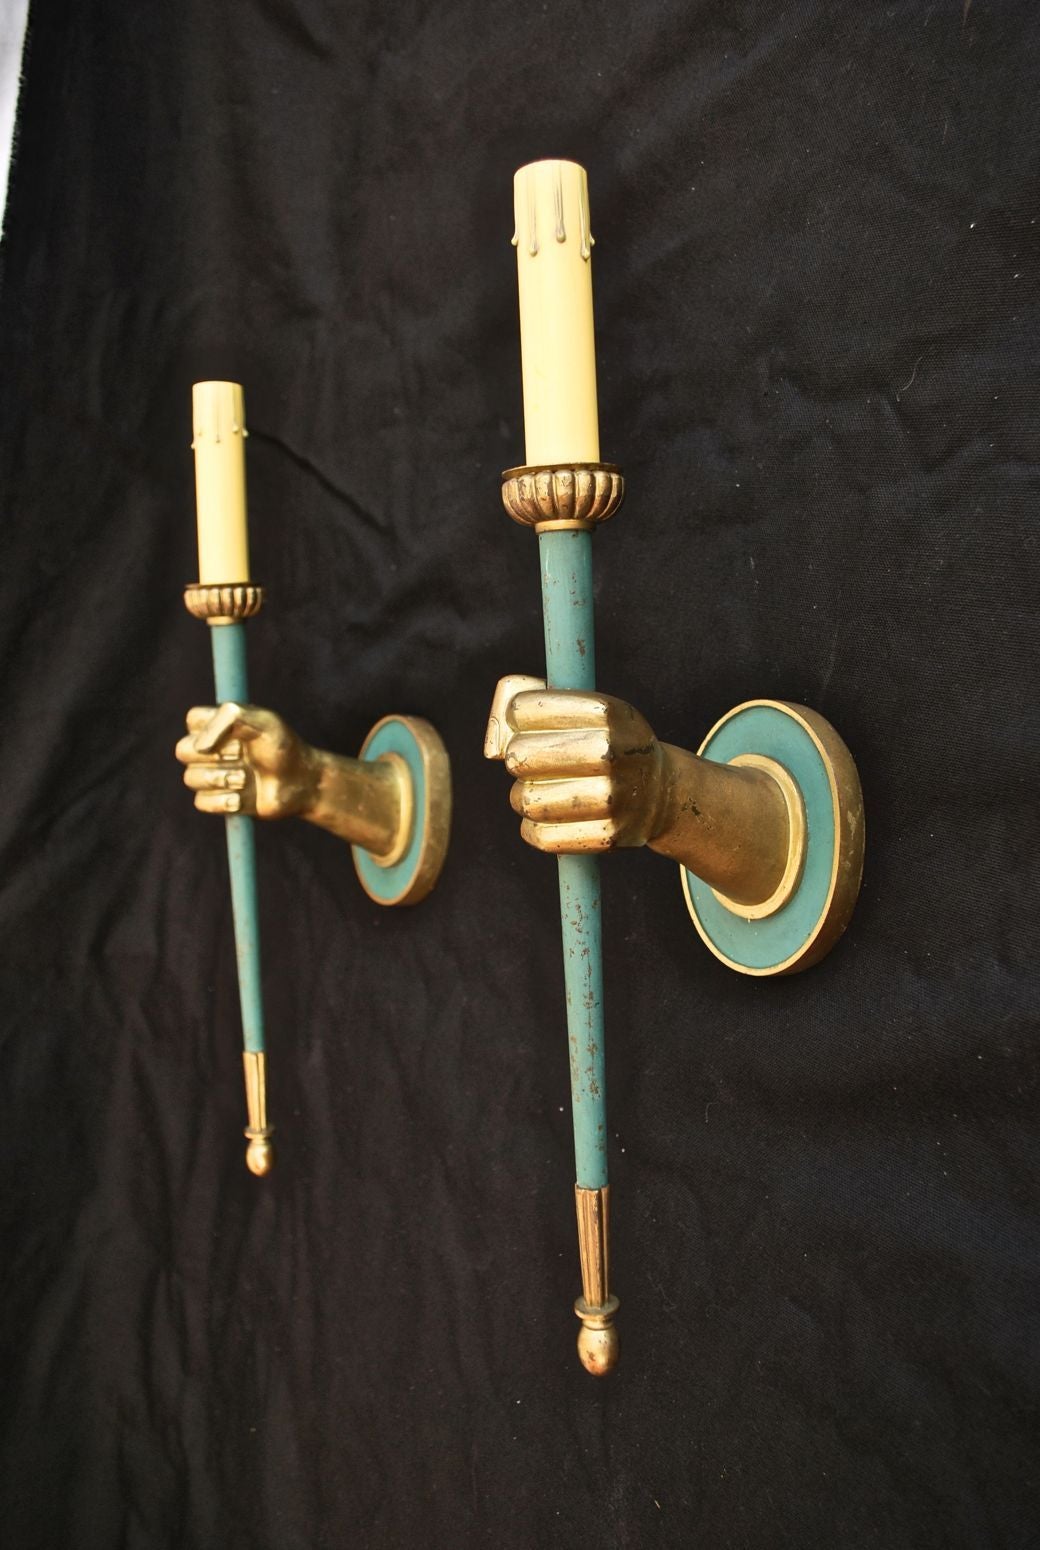 We have over three thousand antique sconces and over one thousand antique lights; if you need a specific pair of sconces or lights, use the contact dealer button to ask us, we might have it in our store.
We also have our own line of wrought iron